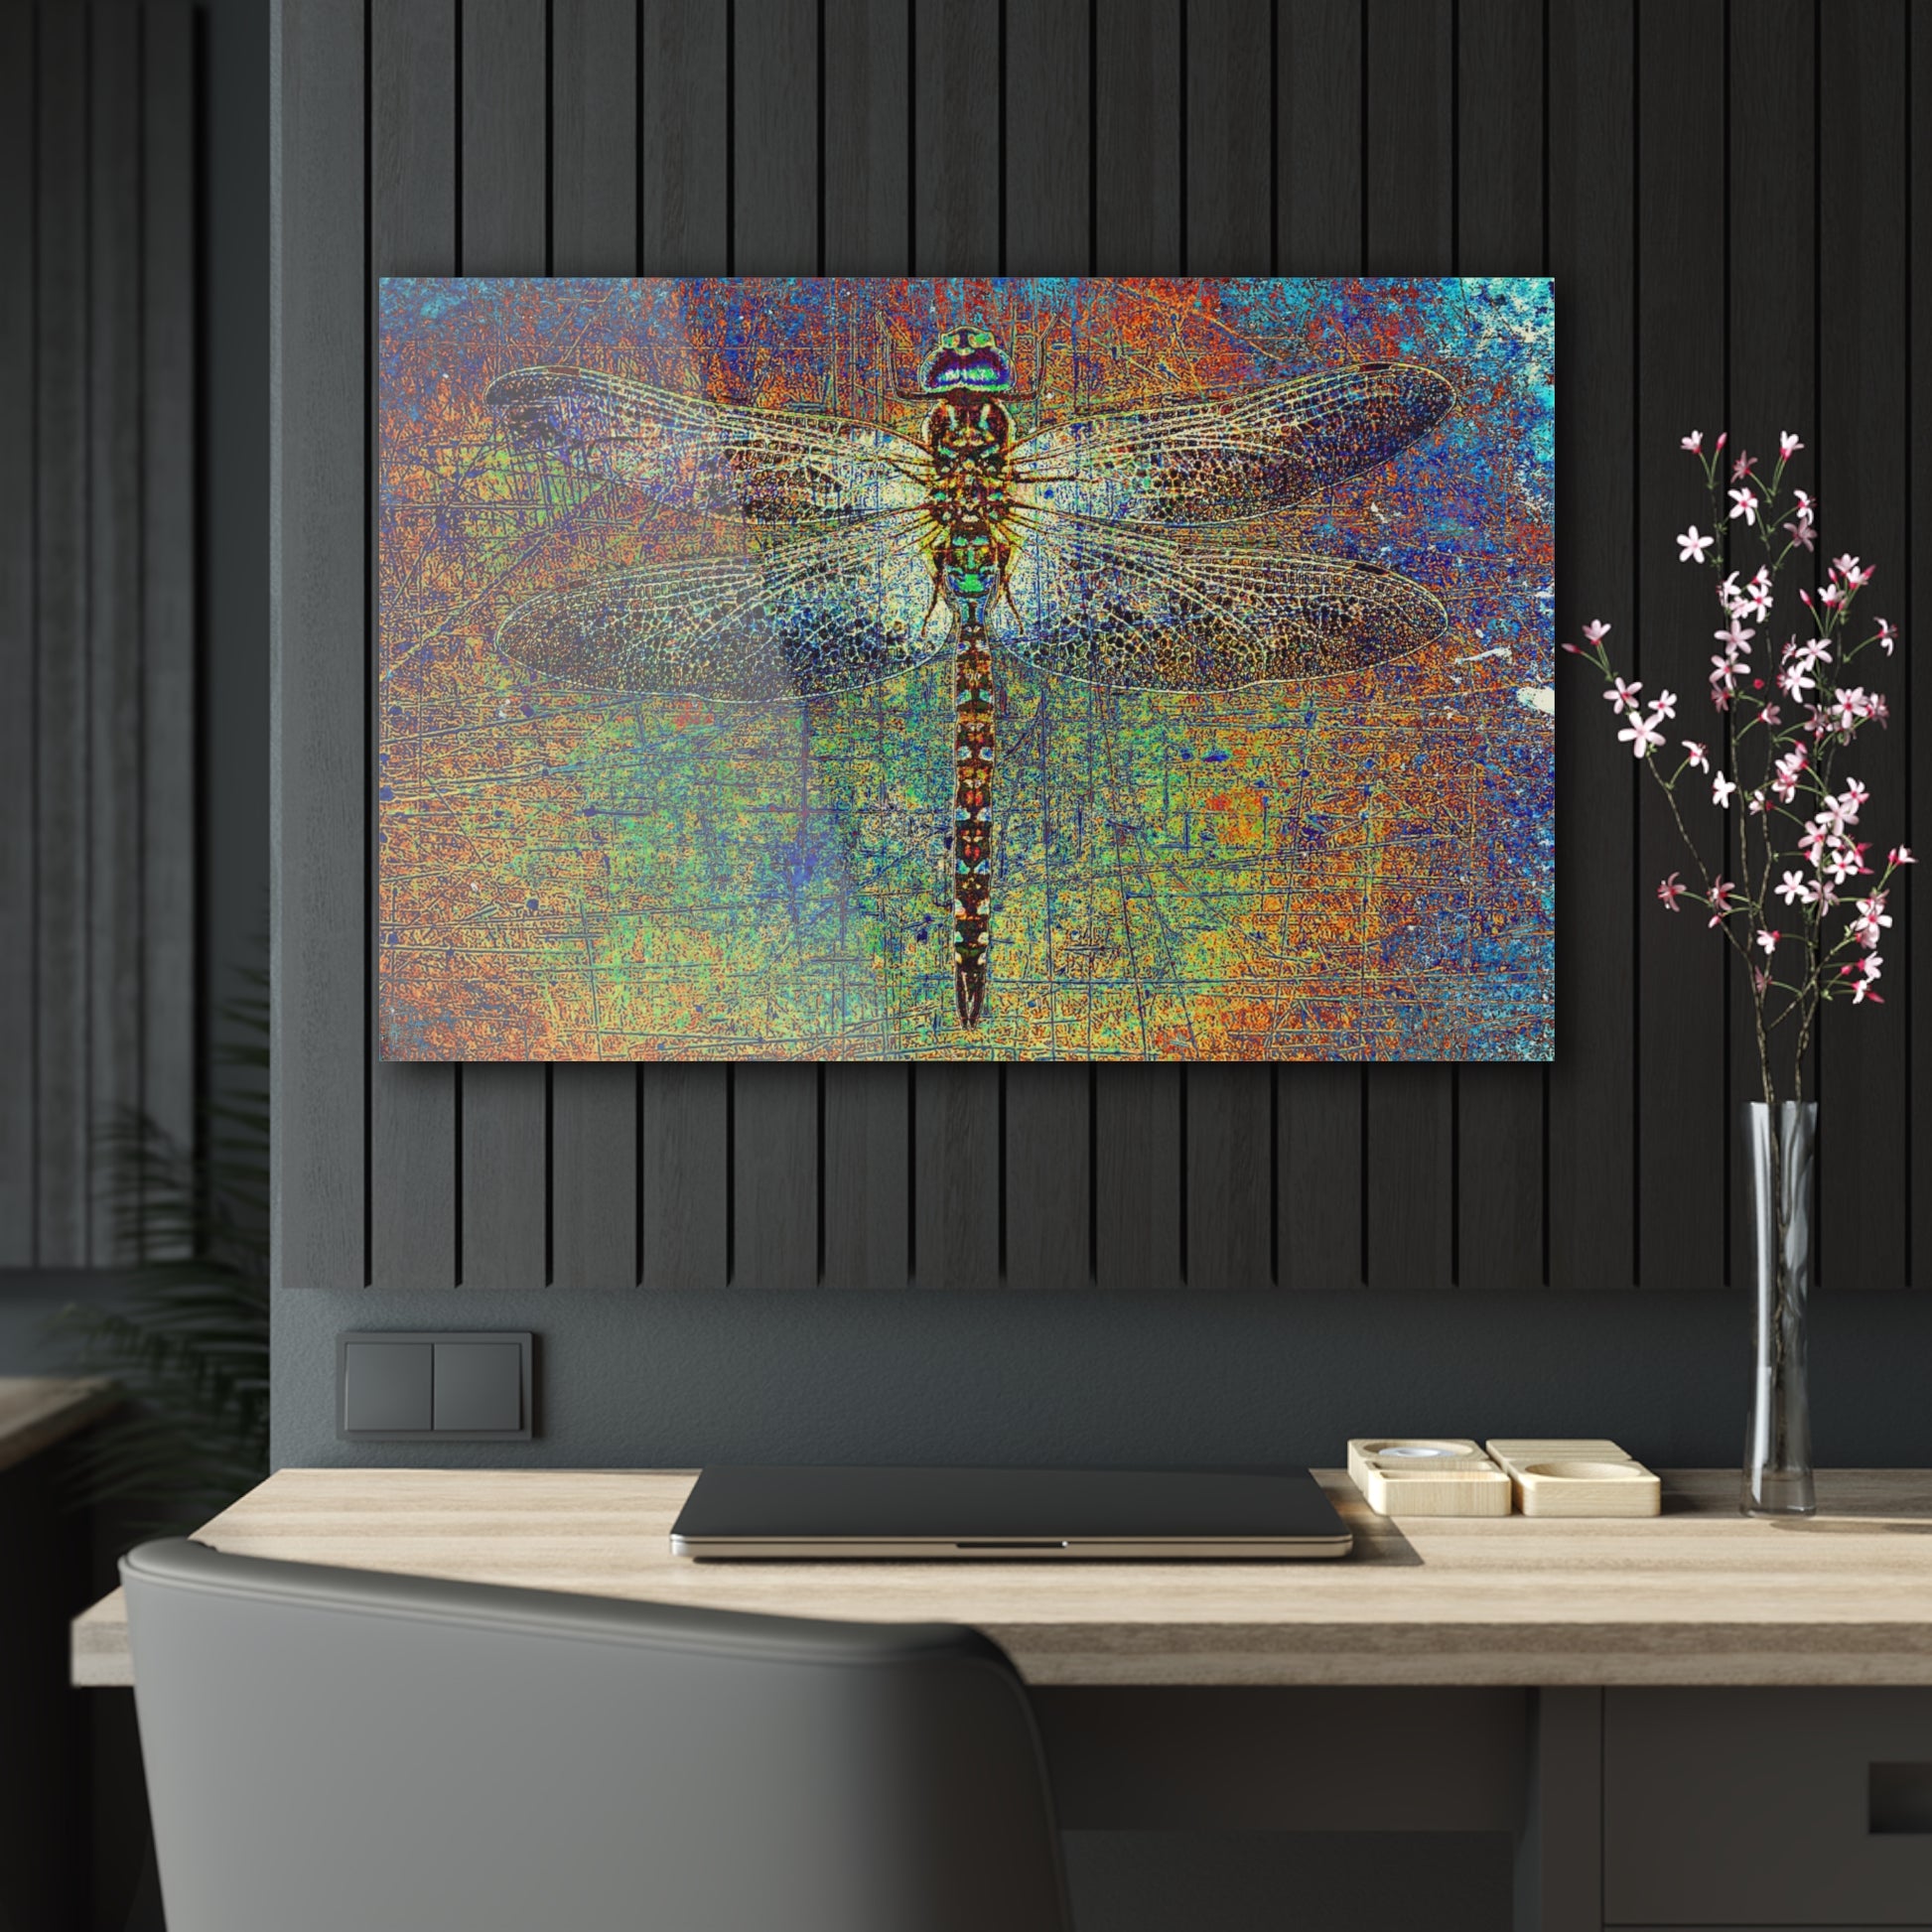 Dragonfly on Multicolor Background Printed on a Crystal Clear Acrylic Panel 36x24